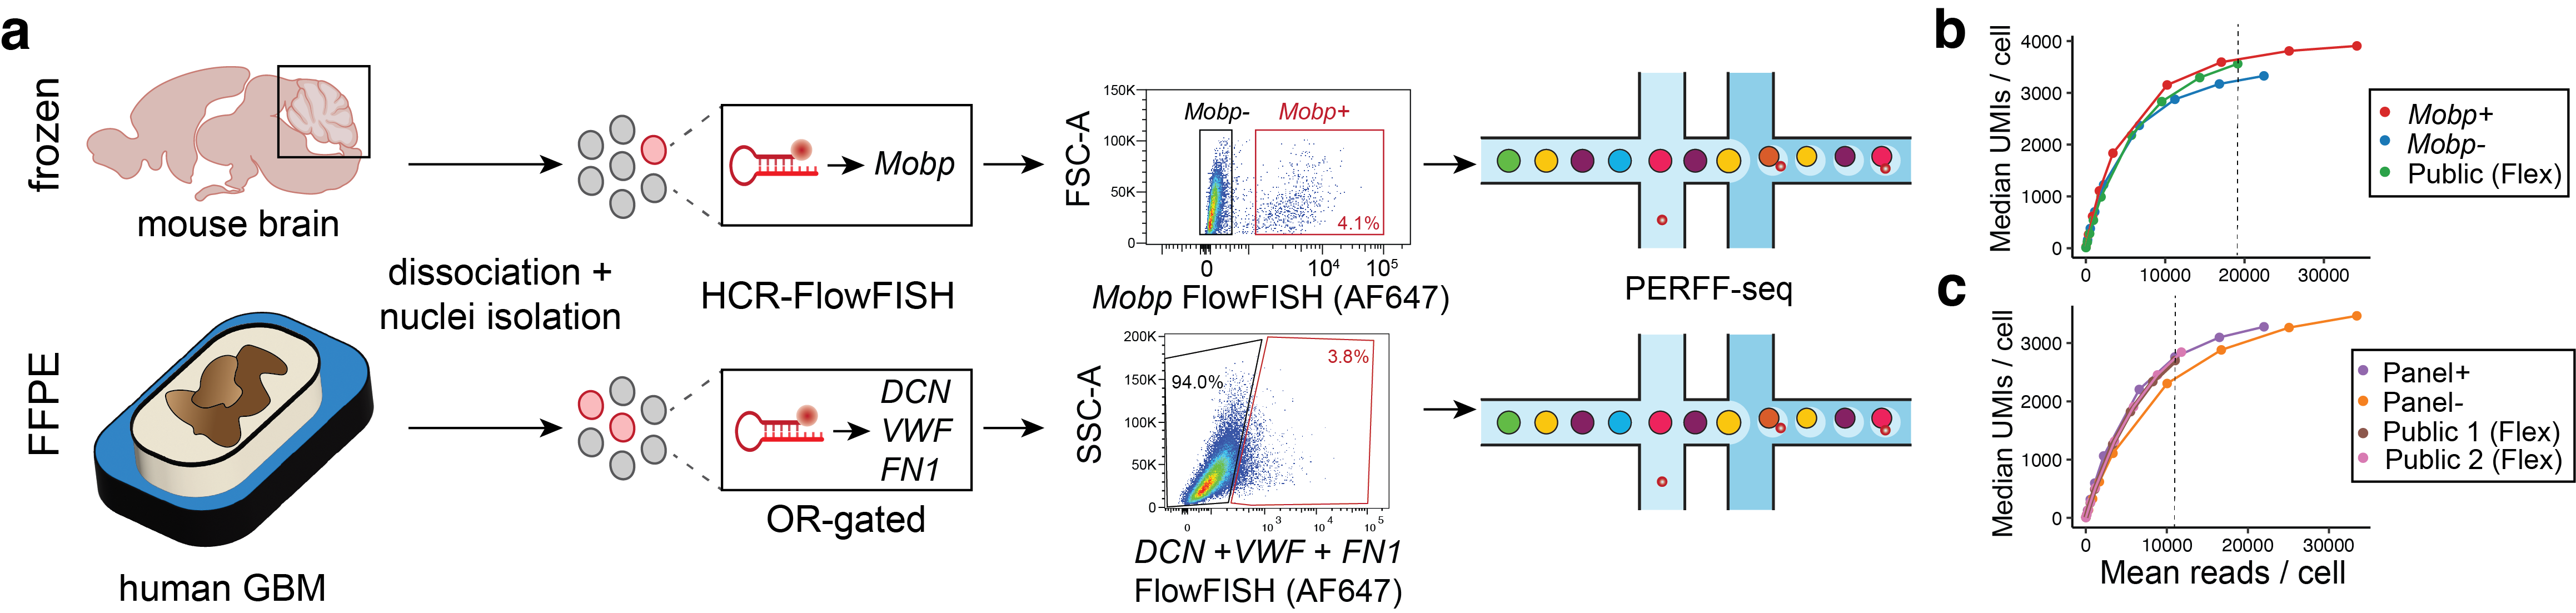 Figure 3. PERFF-seq demonstrates compatibility with sorting nuclei populations. The top portion of panel A shows the HCR-FlowFISH staining and sorting strategy for the rare oligodendrocyte population sorted based on the Mobp marker. Panel B shows downsampling analysis for library saturation and UMI benchmarking for the mouse brain nuclei. Image credit: Abay et al. bioRxiv. (2024). (Included with permission of Dr. Caleb Lareau).